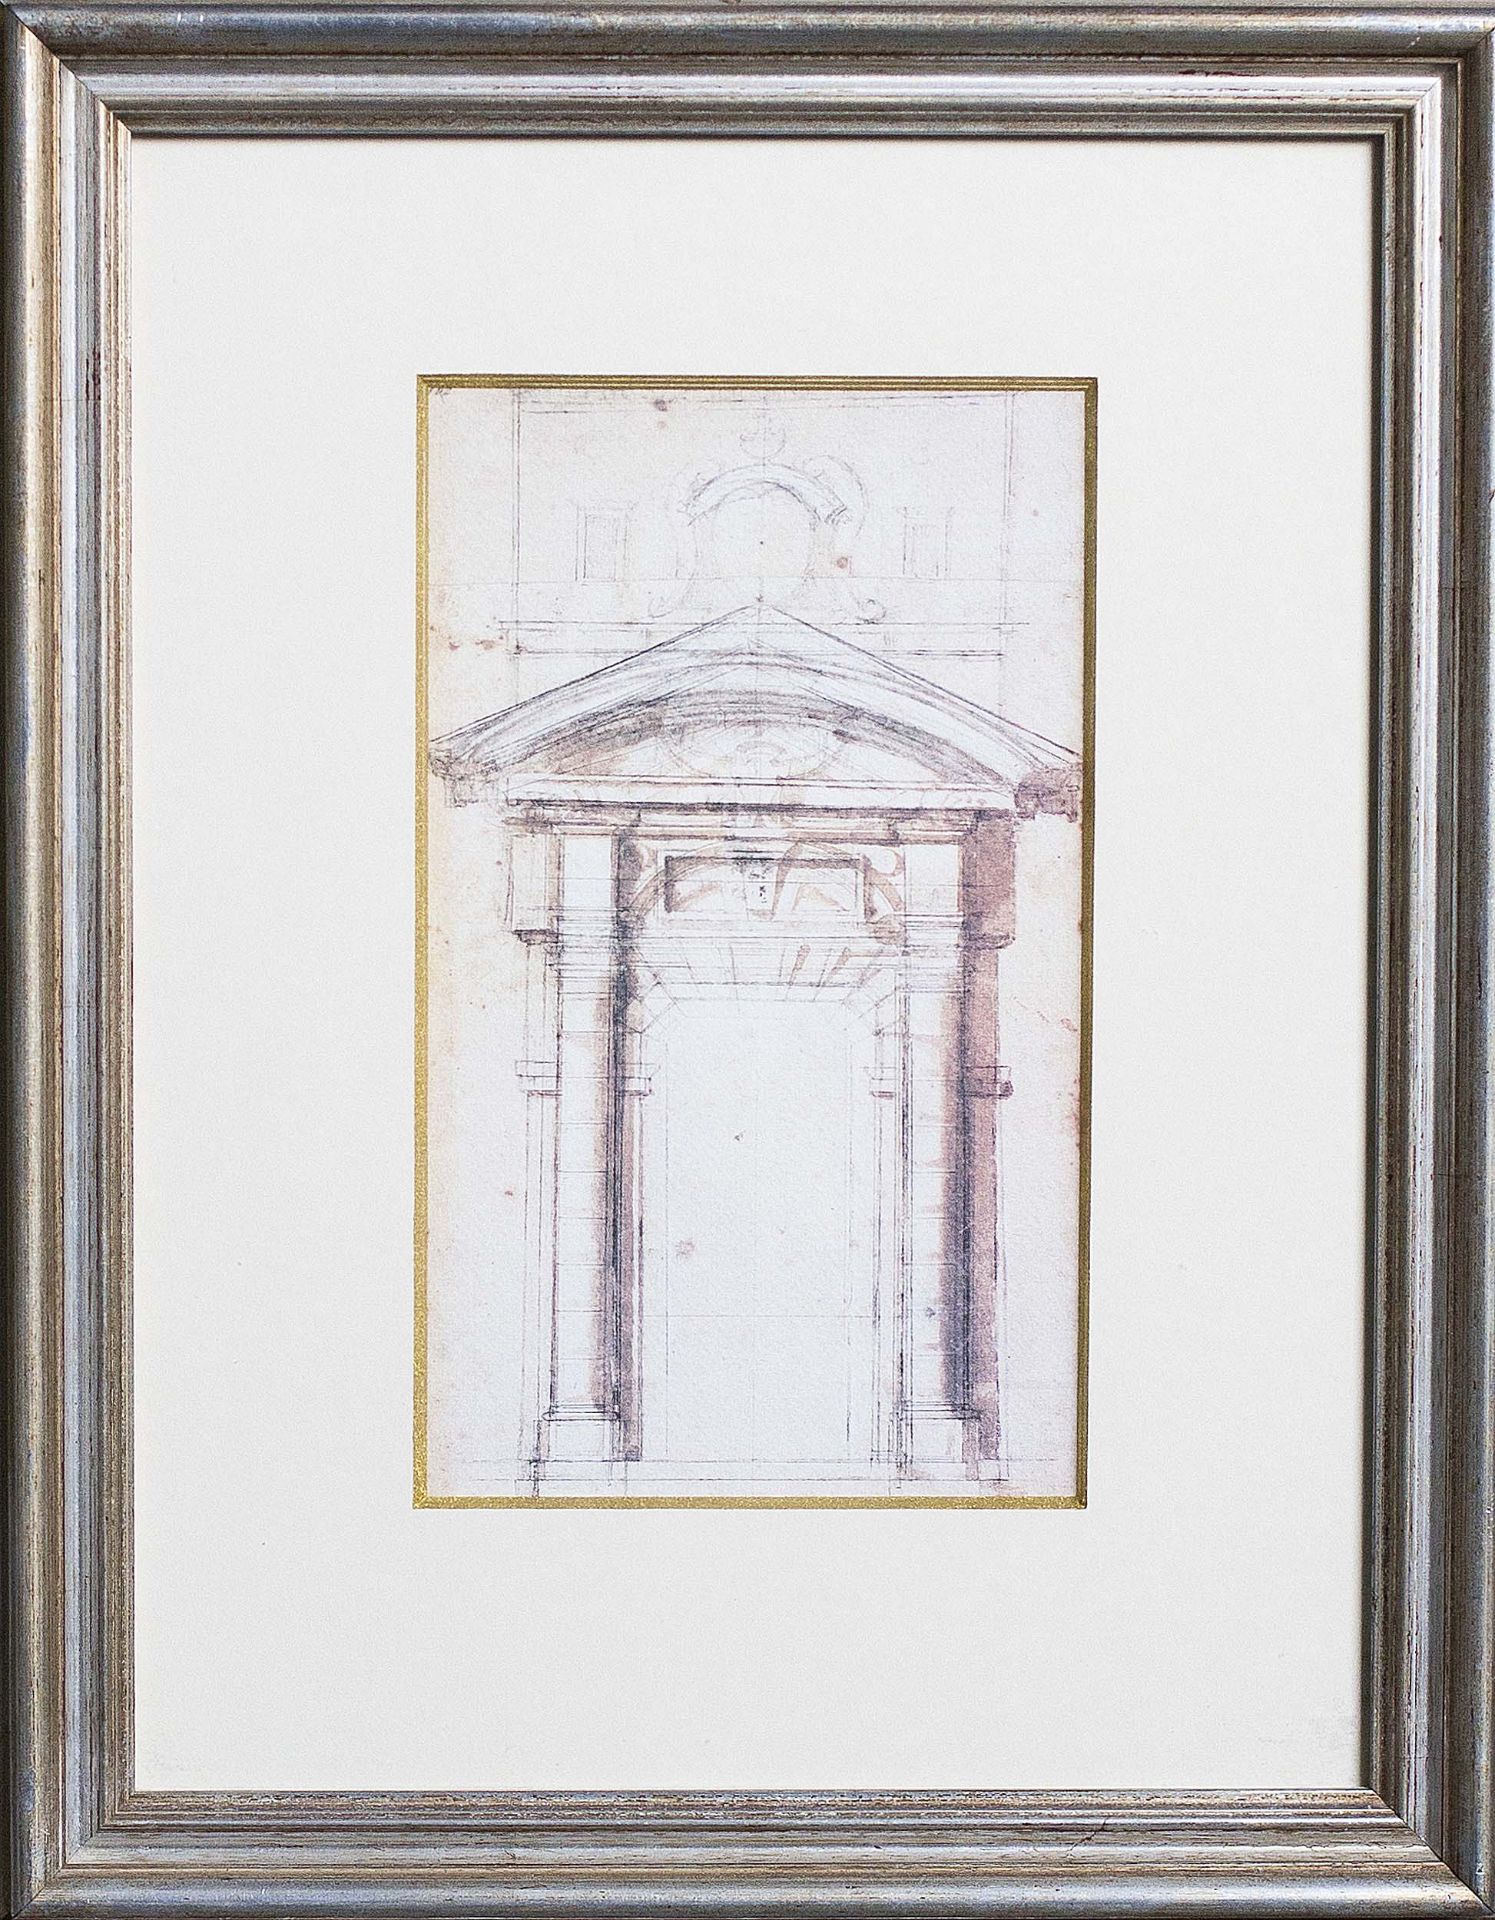 Series of six prints of a Roman temple entrance in a silver frame 49 x 39cm - Image 4 of 6